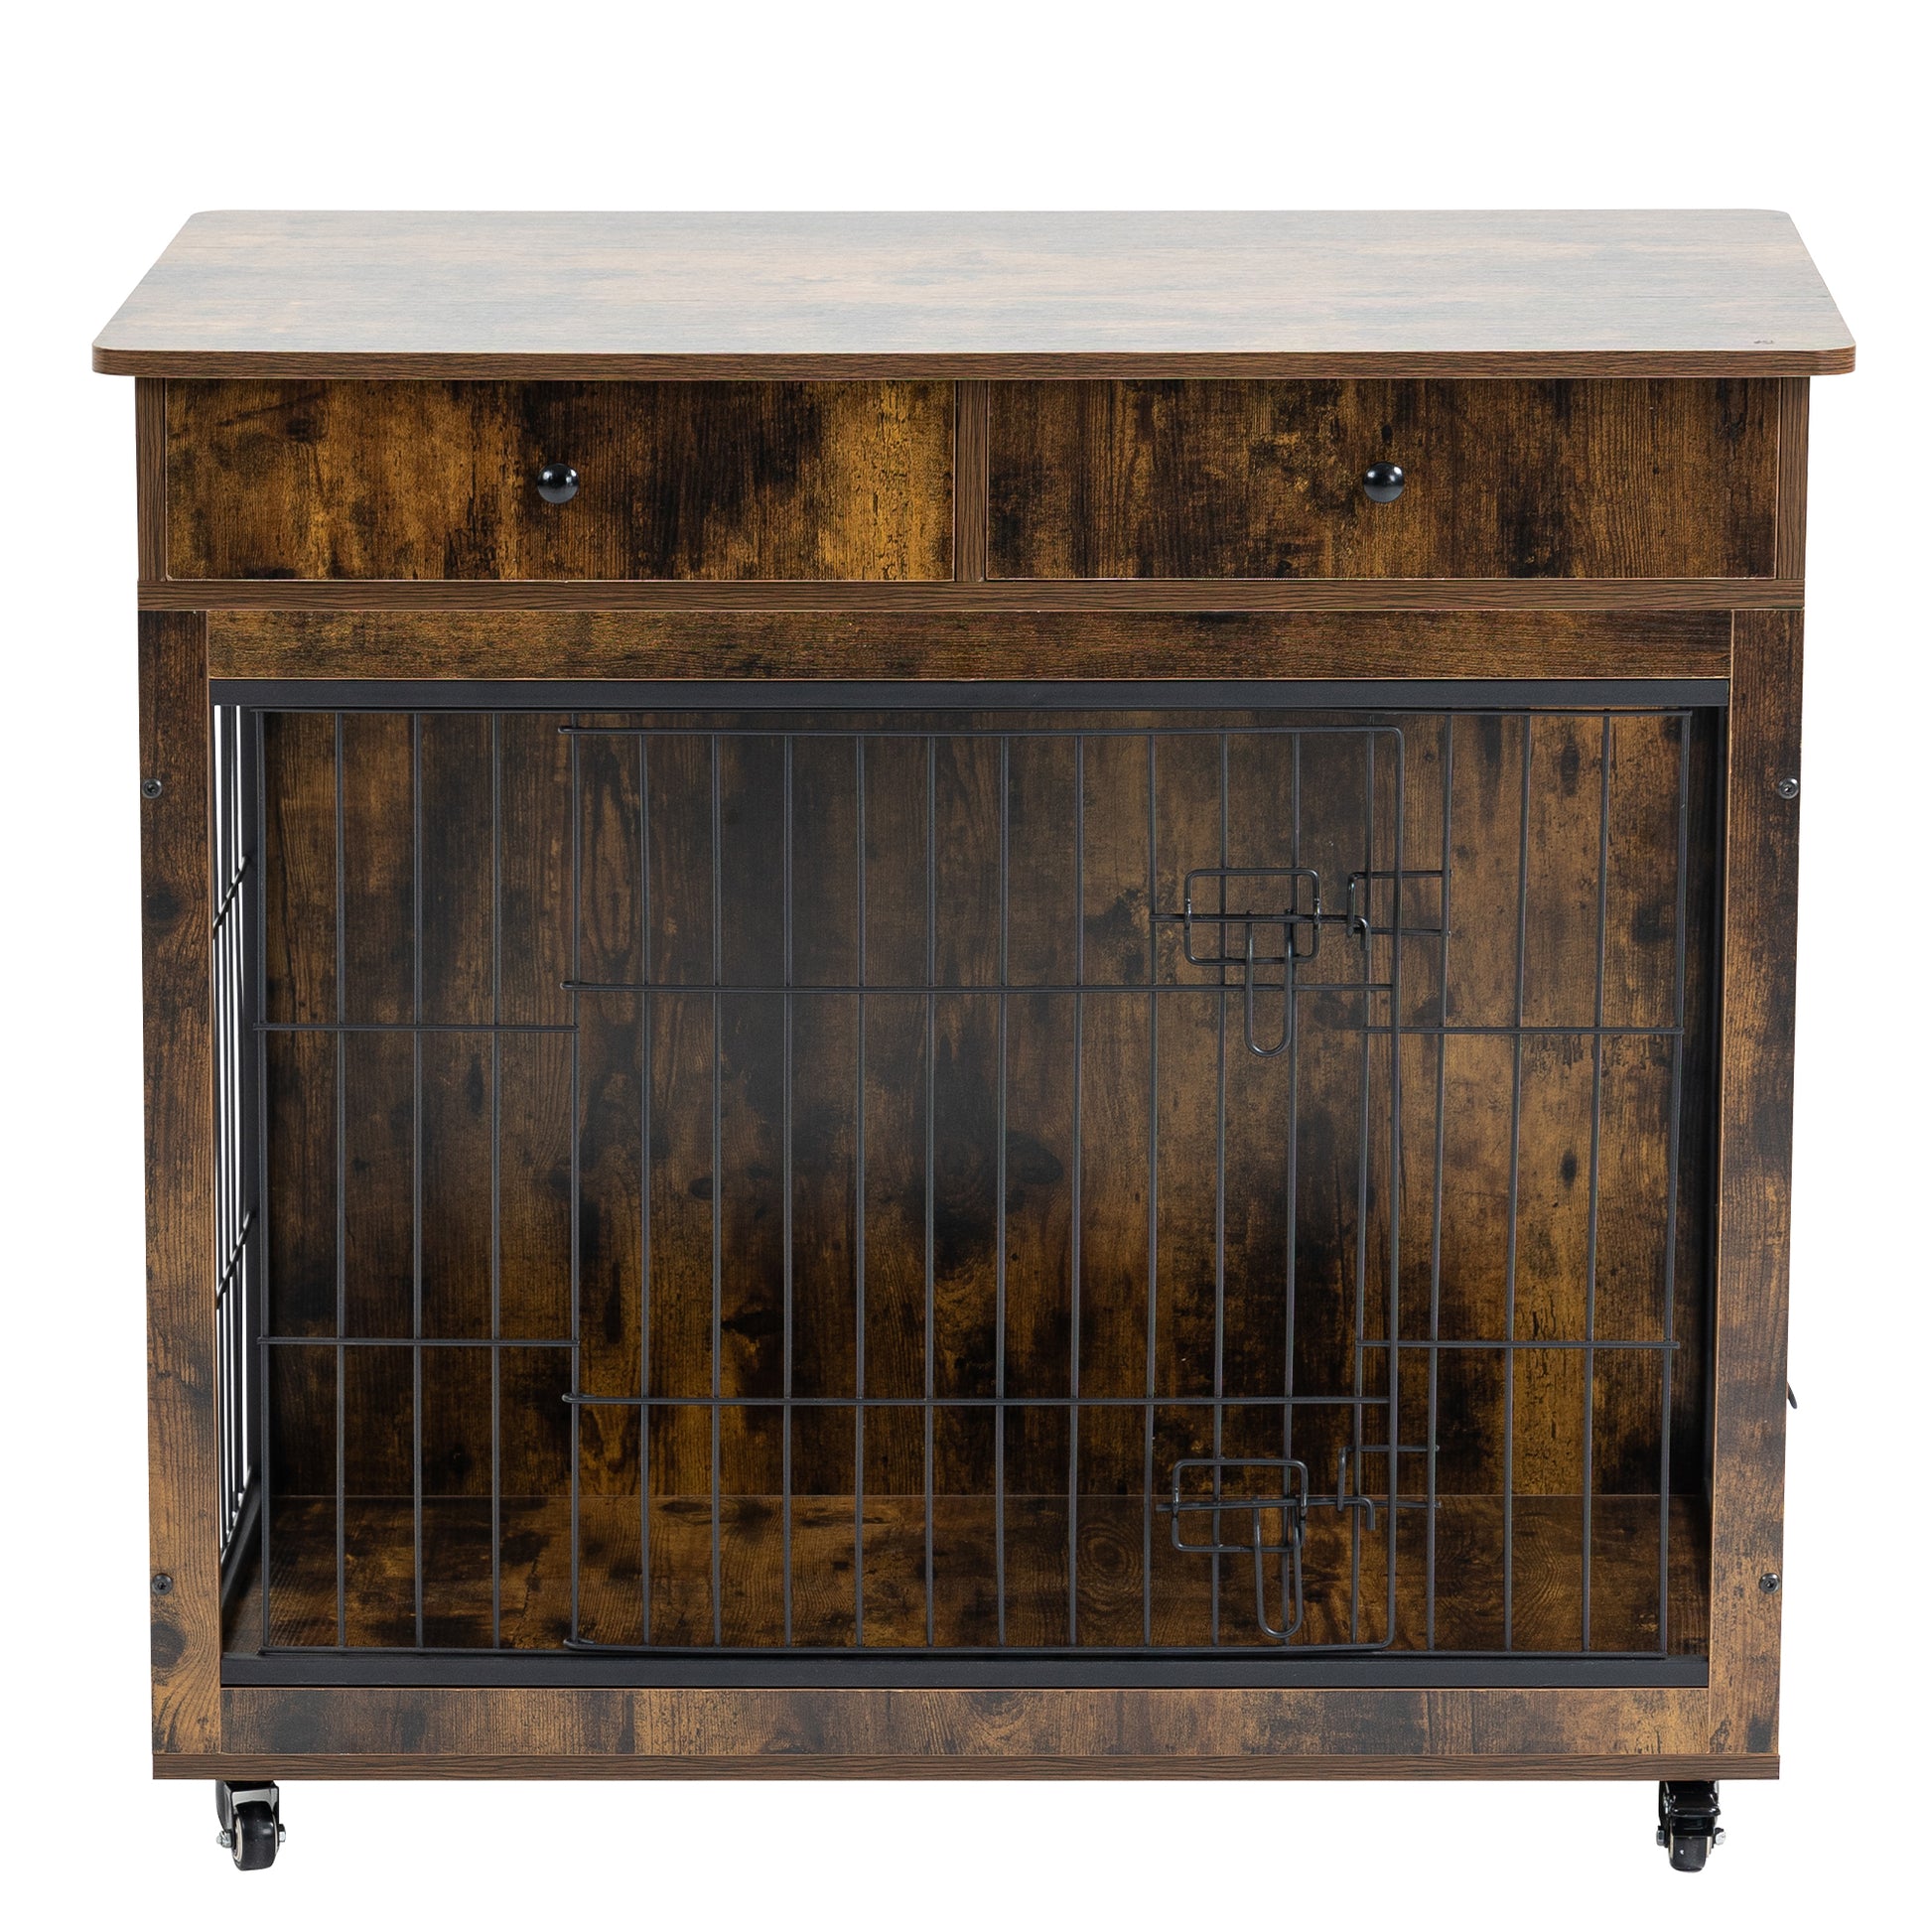 38.4" Wooden Dog Crate End Table with 2 Drawers - Ukerr Home